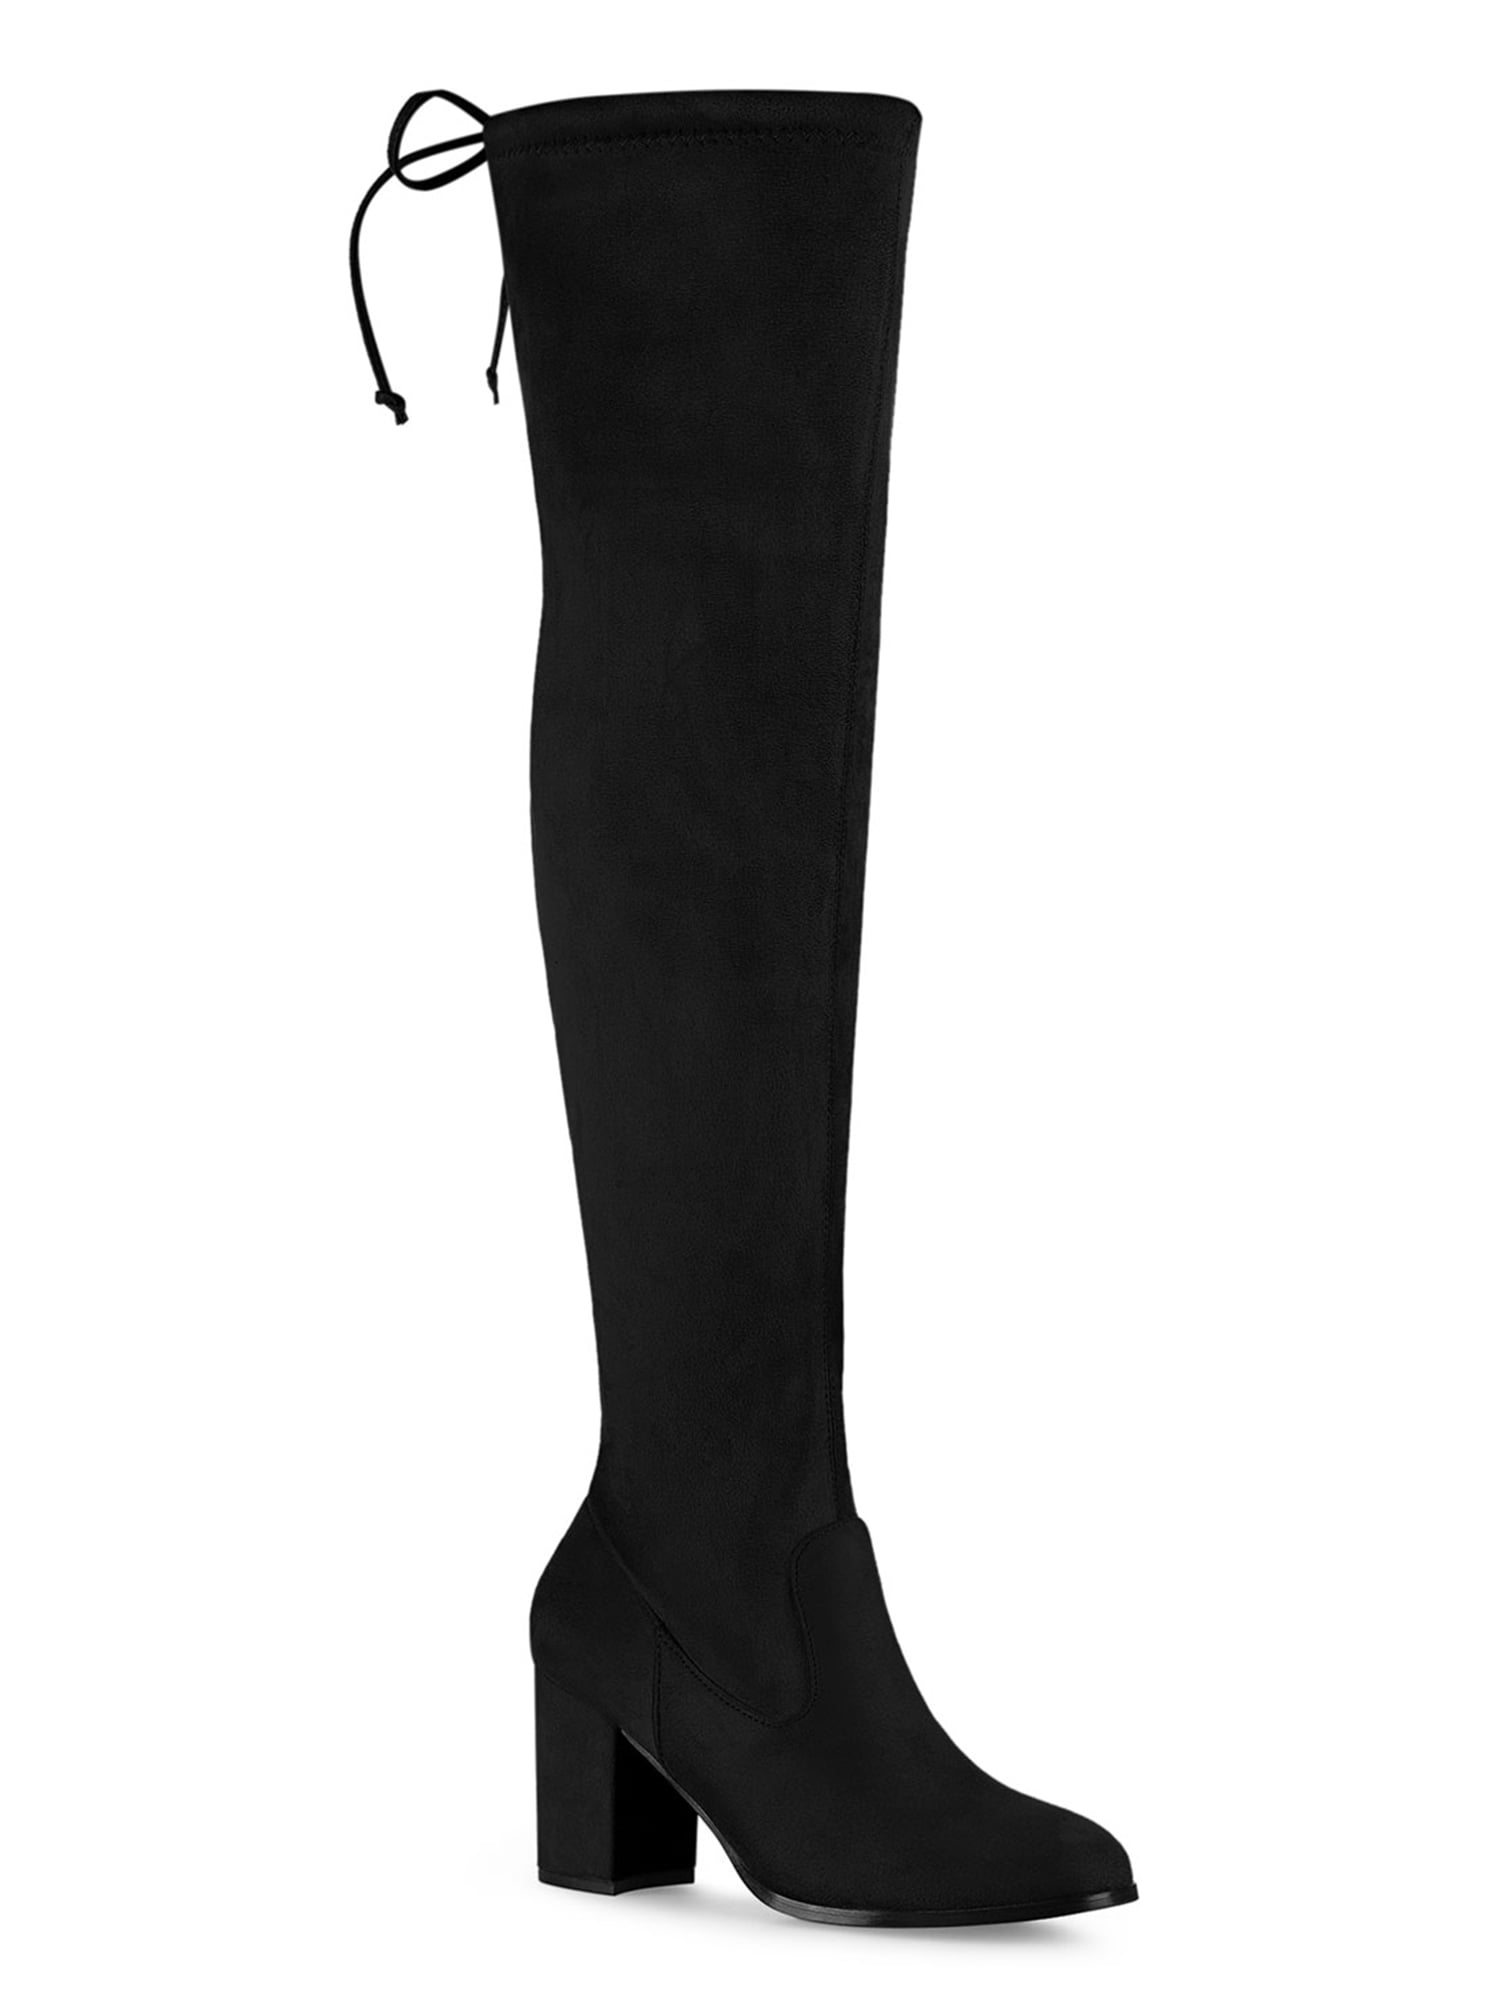 Details about   Trendy Women Suede Round Toe Block Heel Over Knee High Thigh Boots Outwear Comfy 